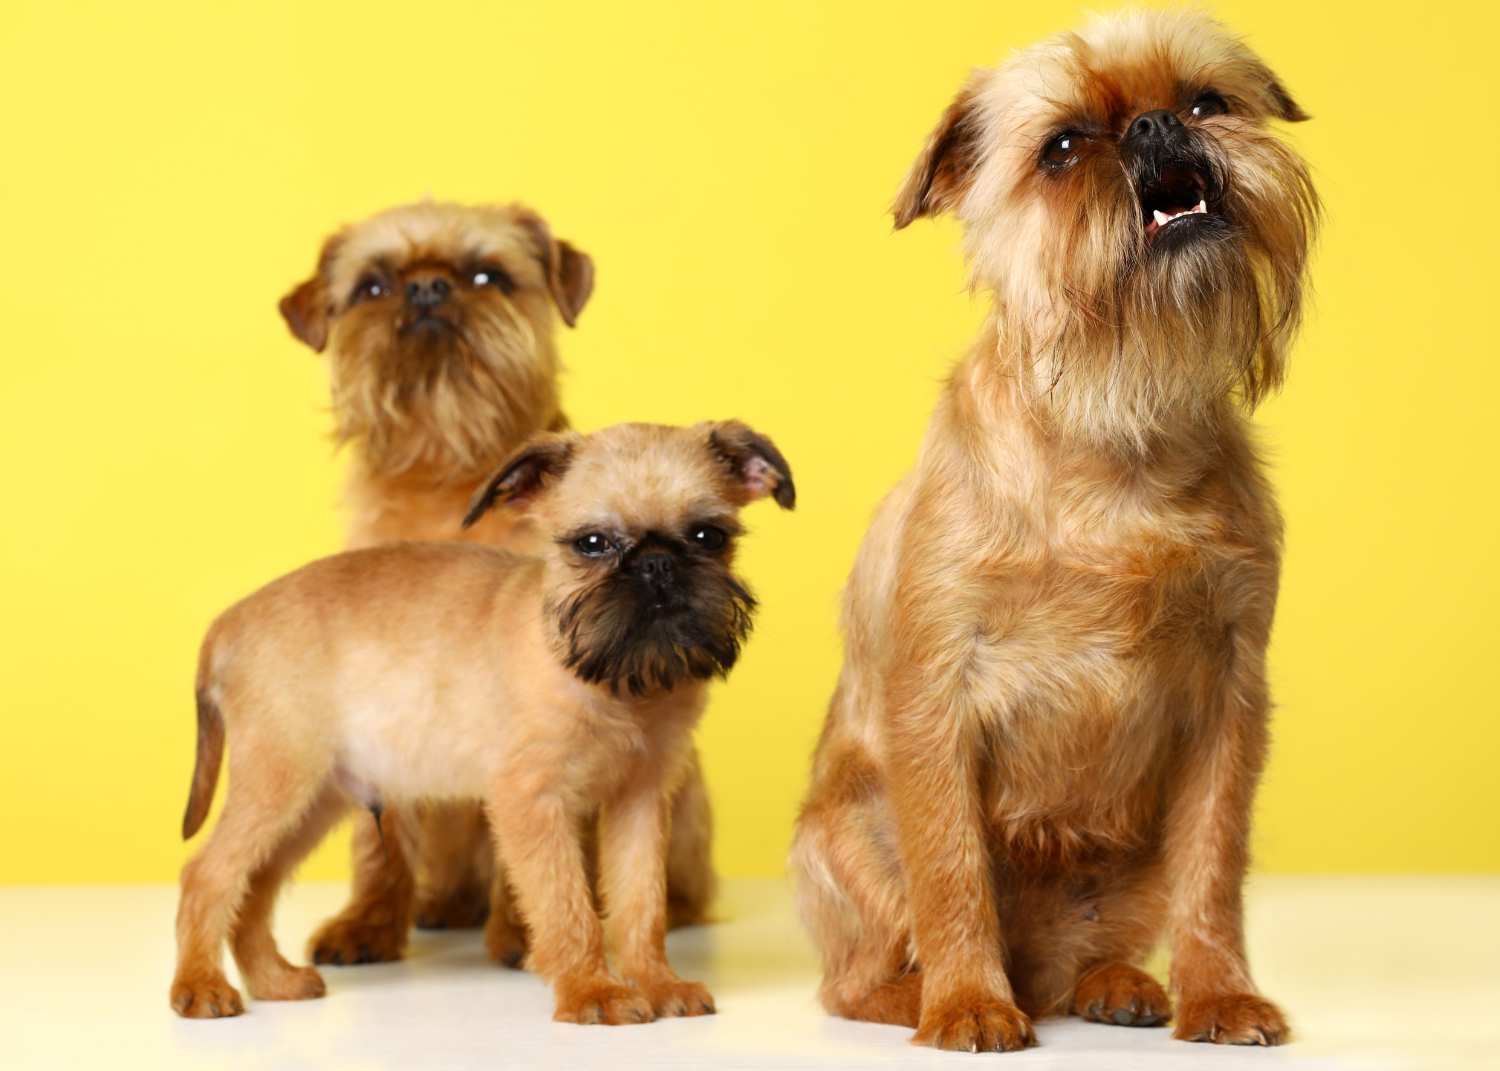 3 tan and brown Brussels Griffon dogs against a lemon yellow background